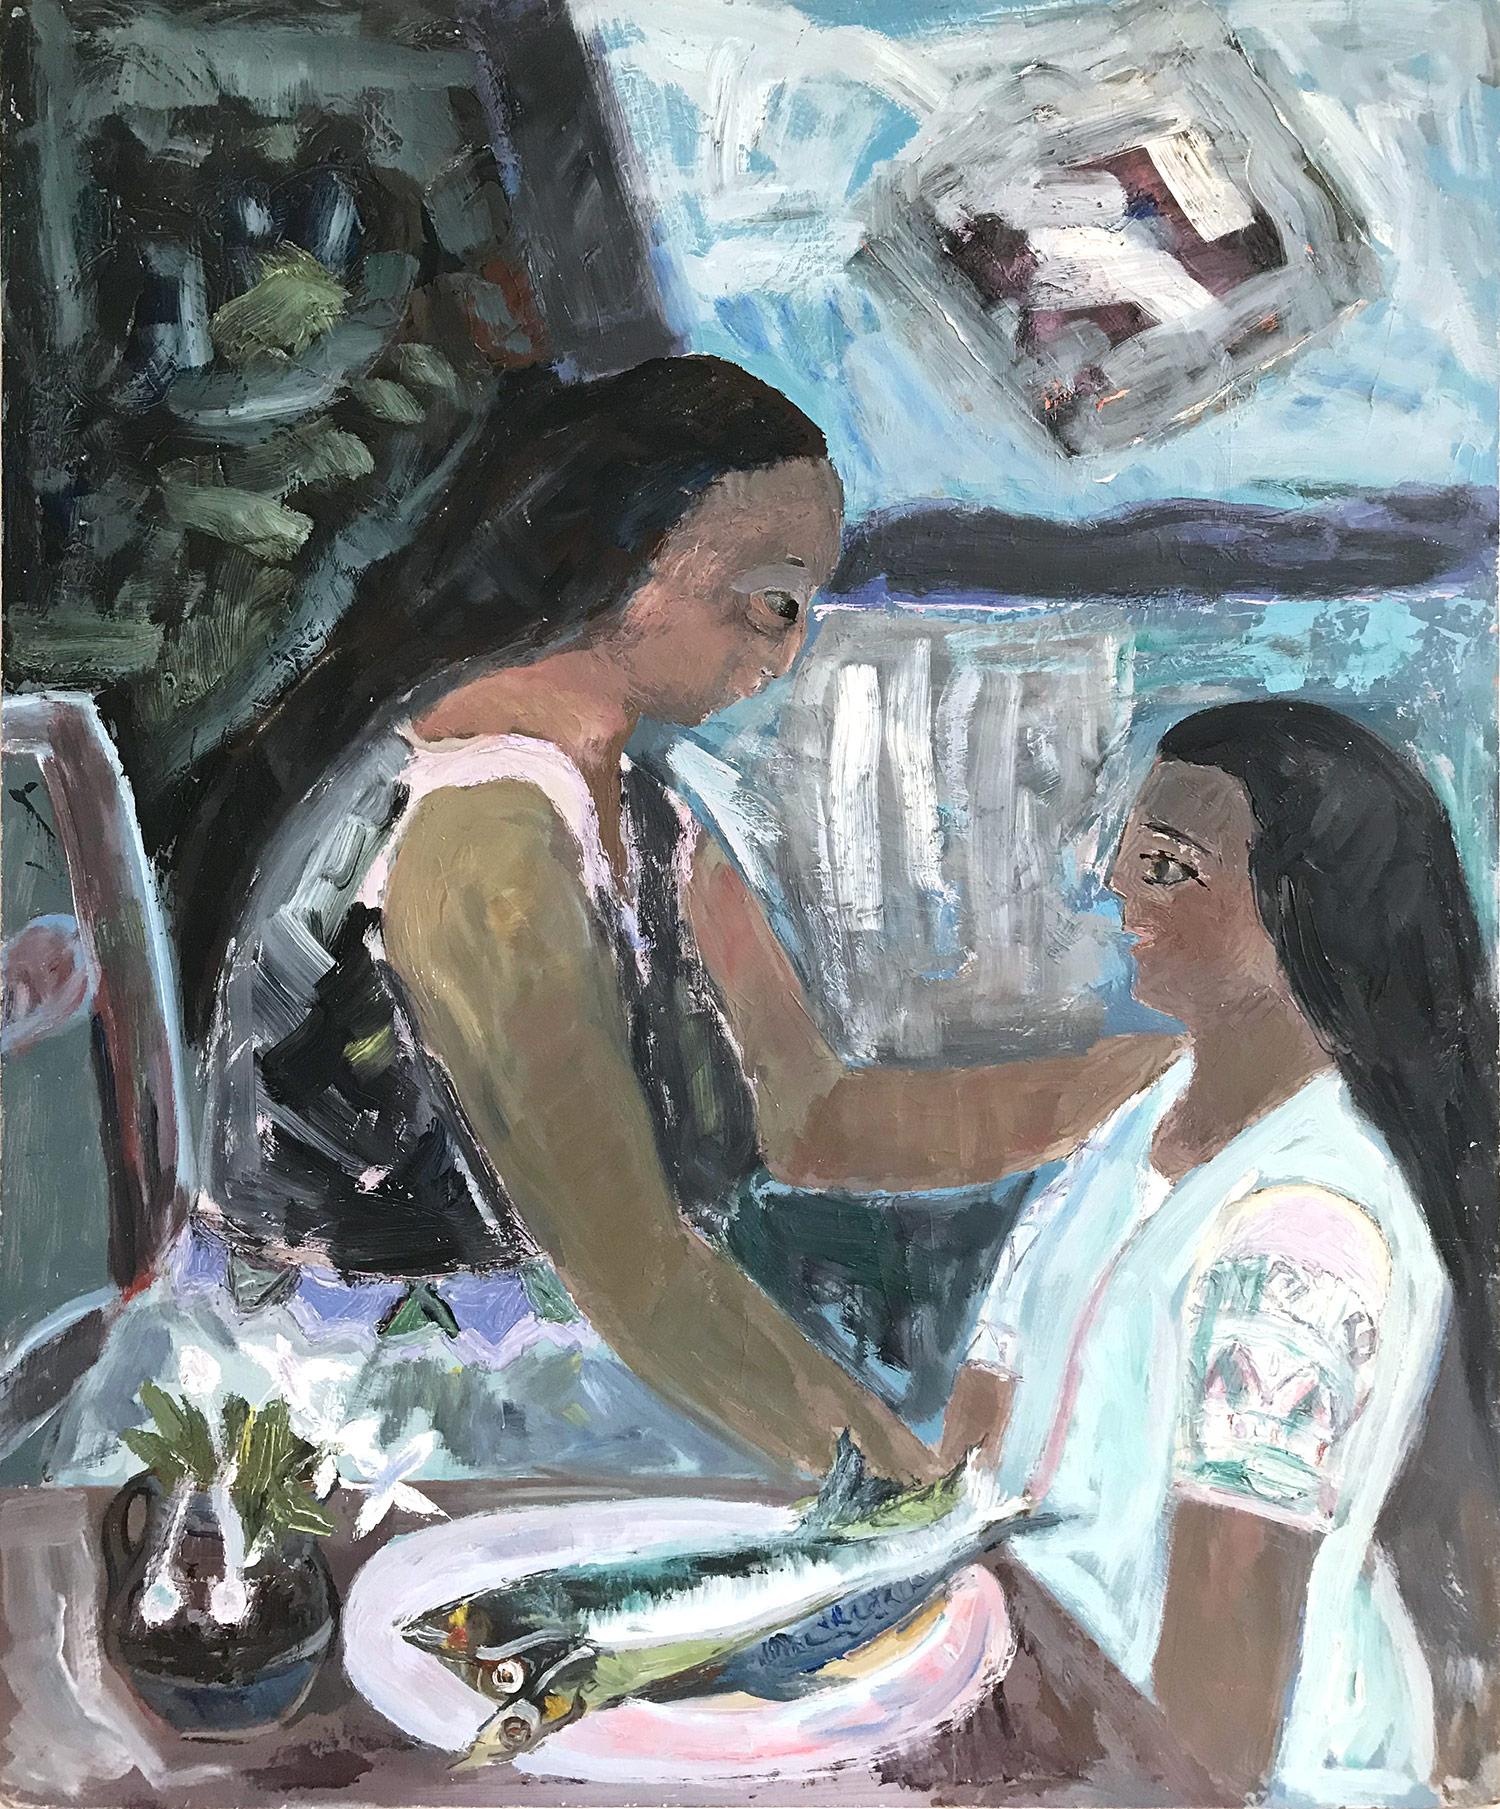 Michael Baxte Figurative Painting - "Mexican Interior Scene Scene with Figures and Fish" Expressionistic Style